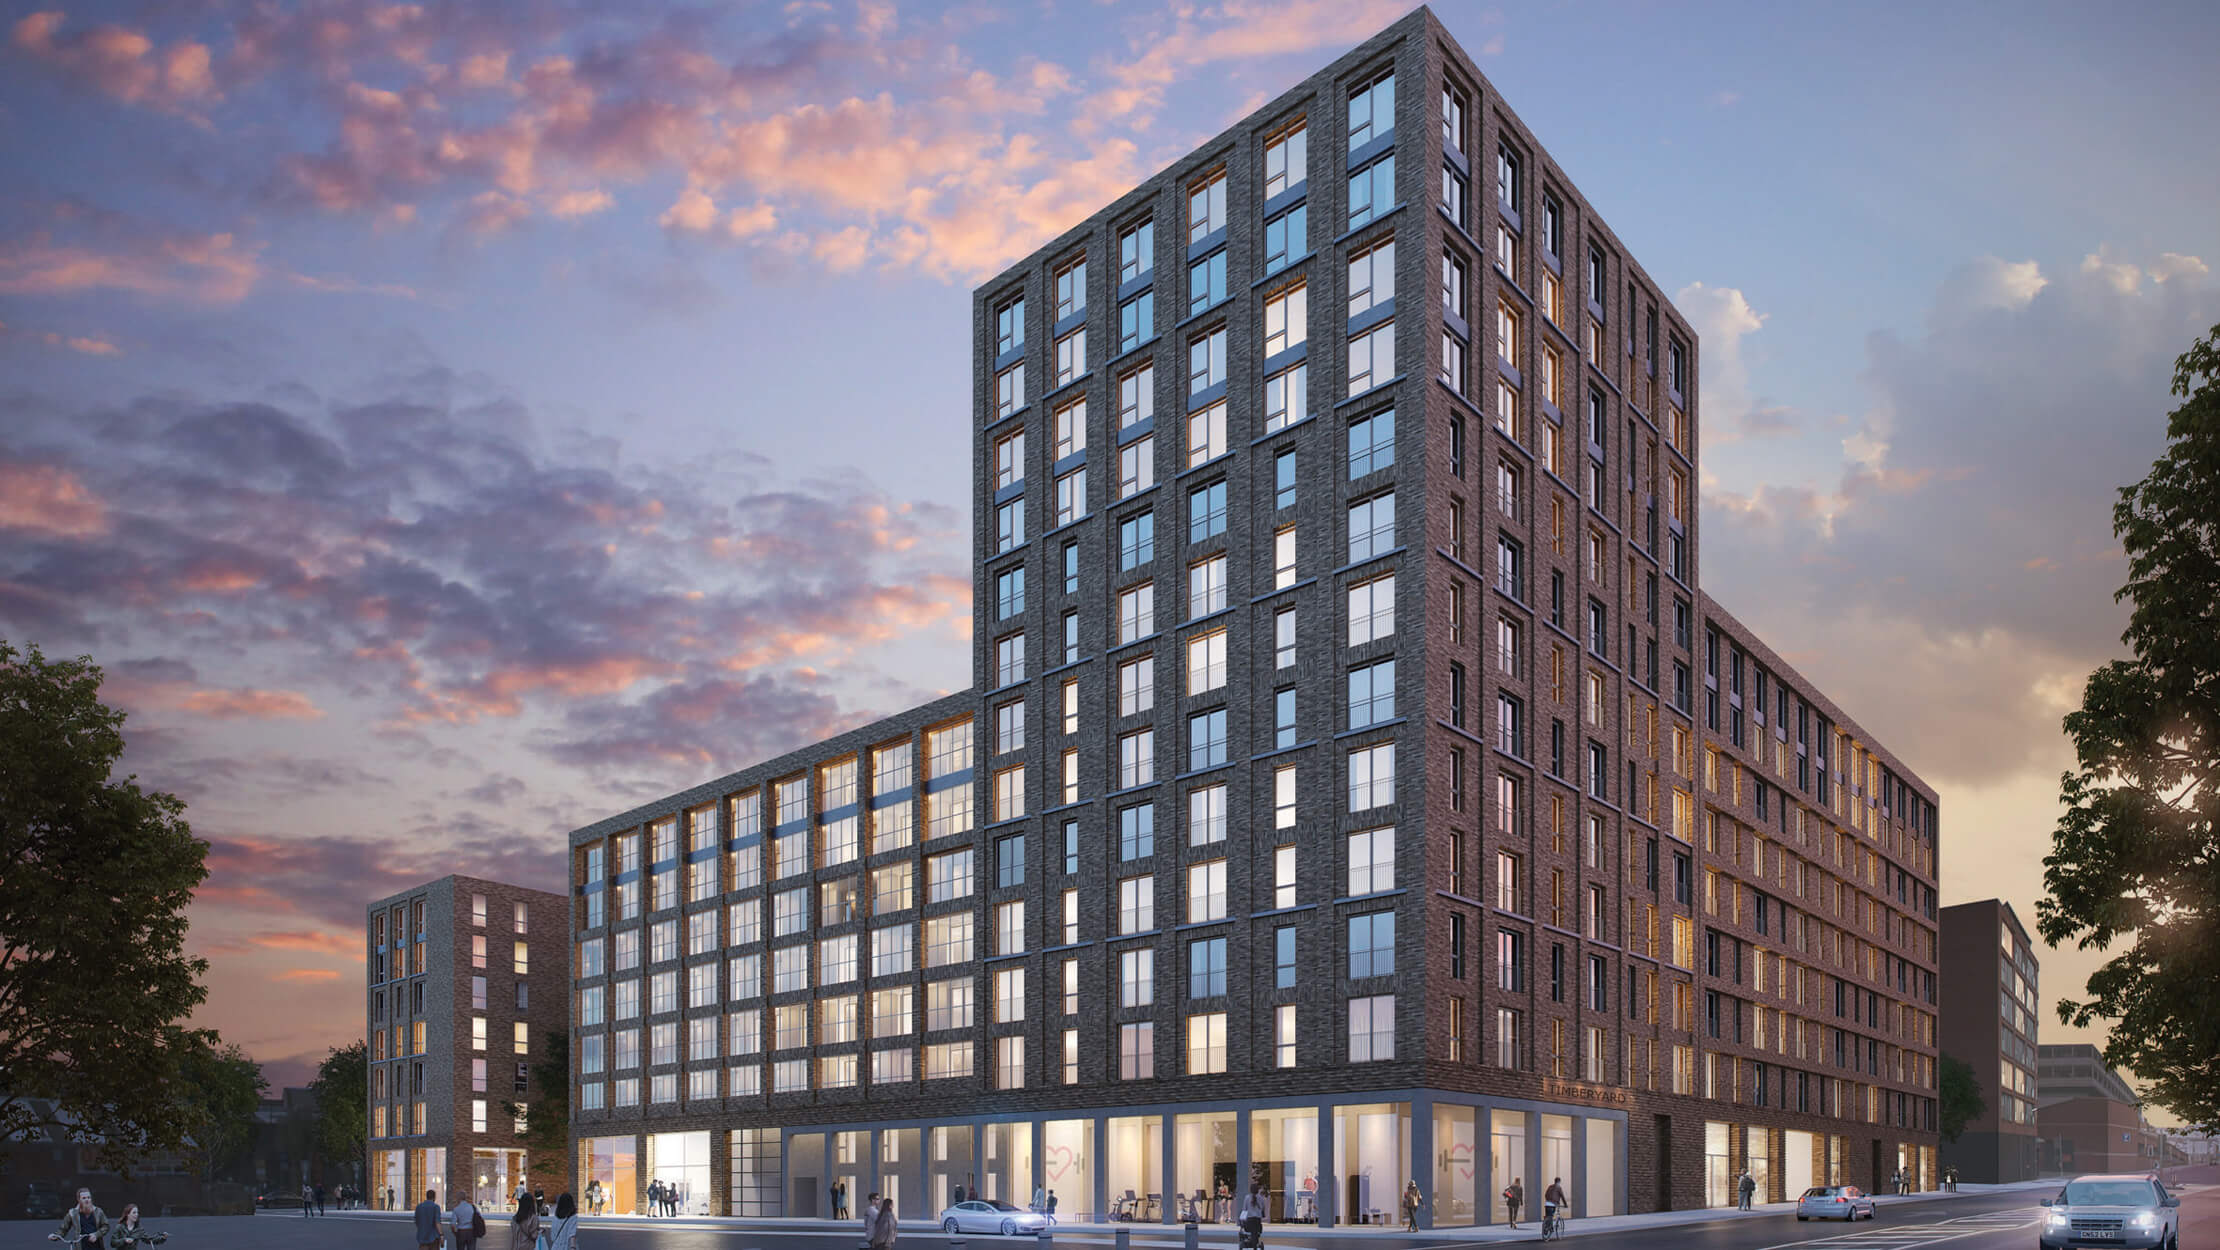 An exterior CGI of Timber Yard, a Galliard Homes development in the heart of Birmingham City Centre.